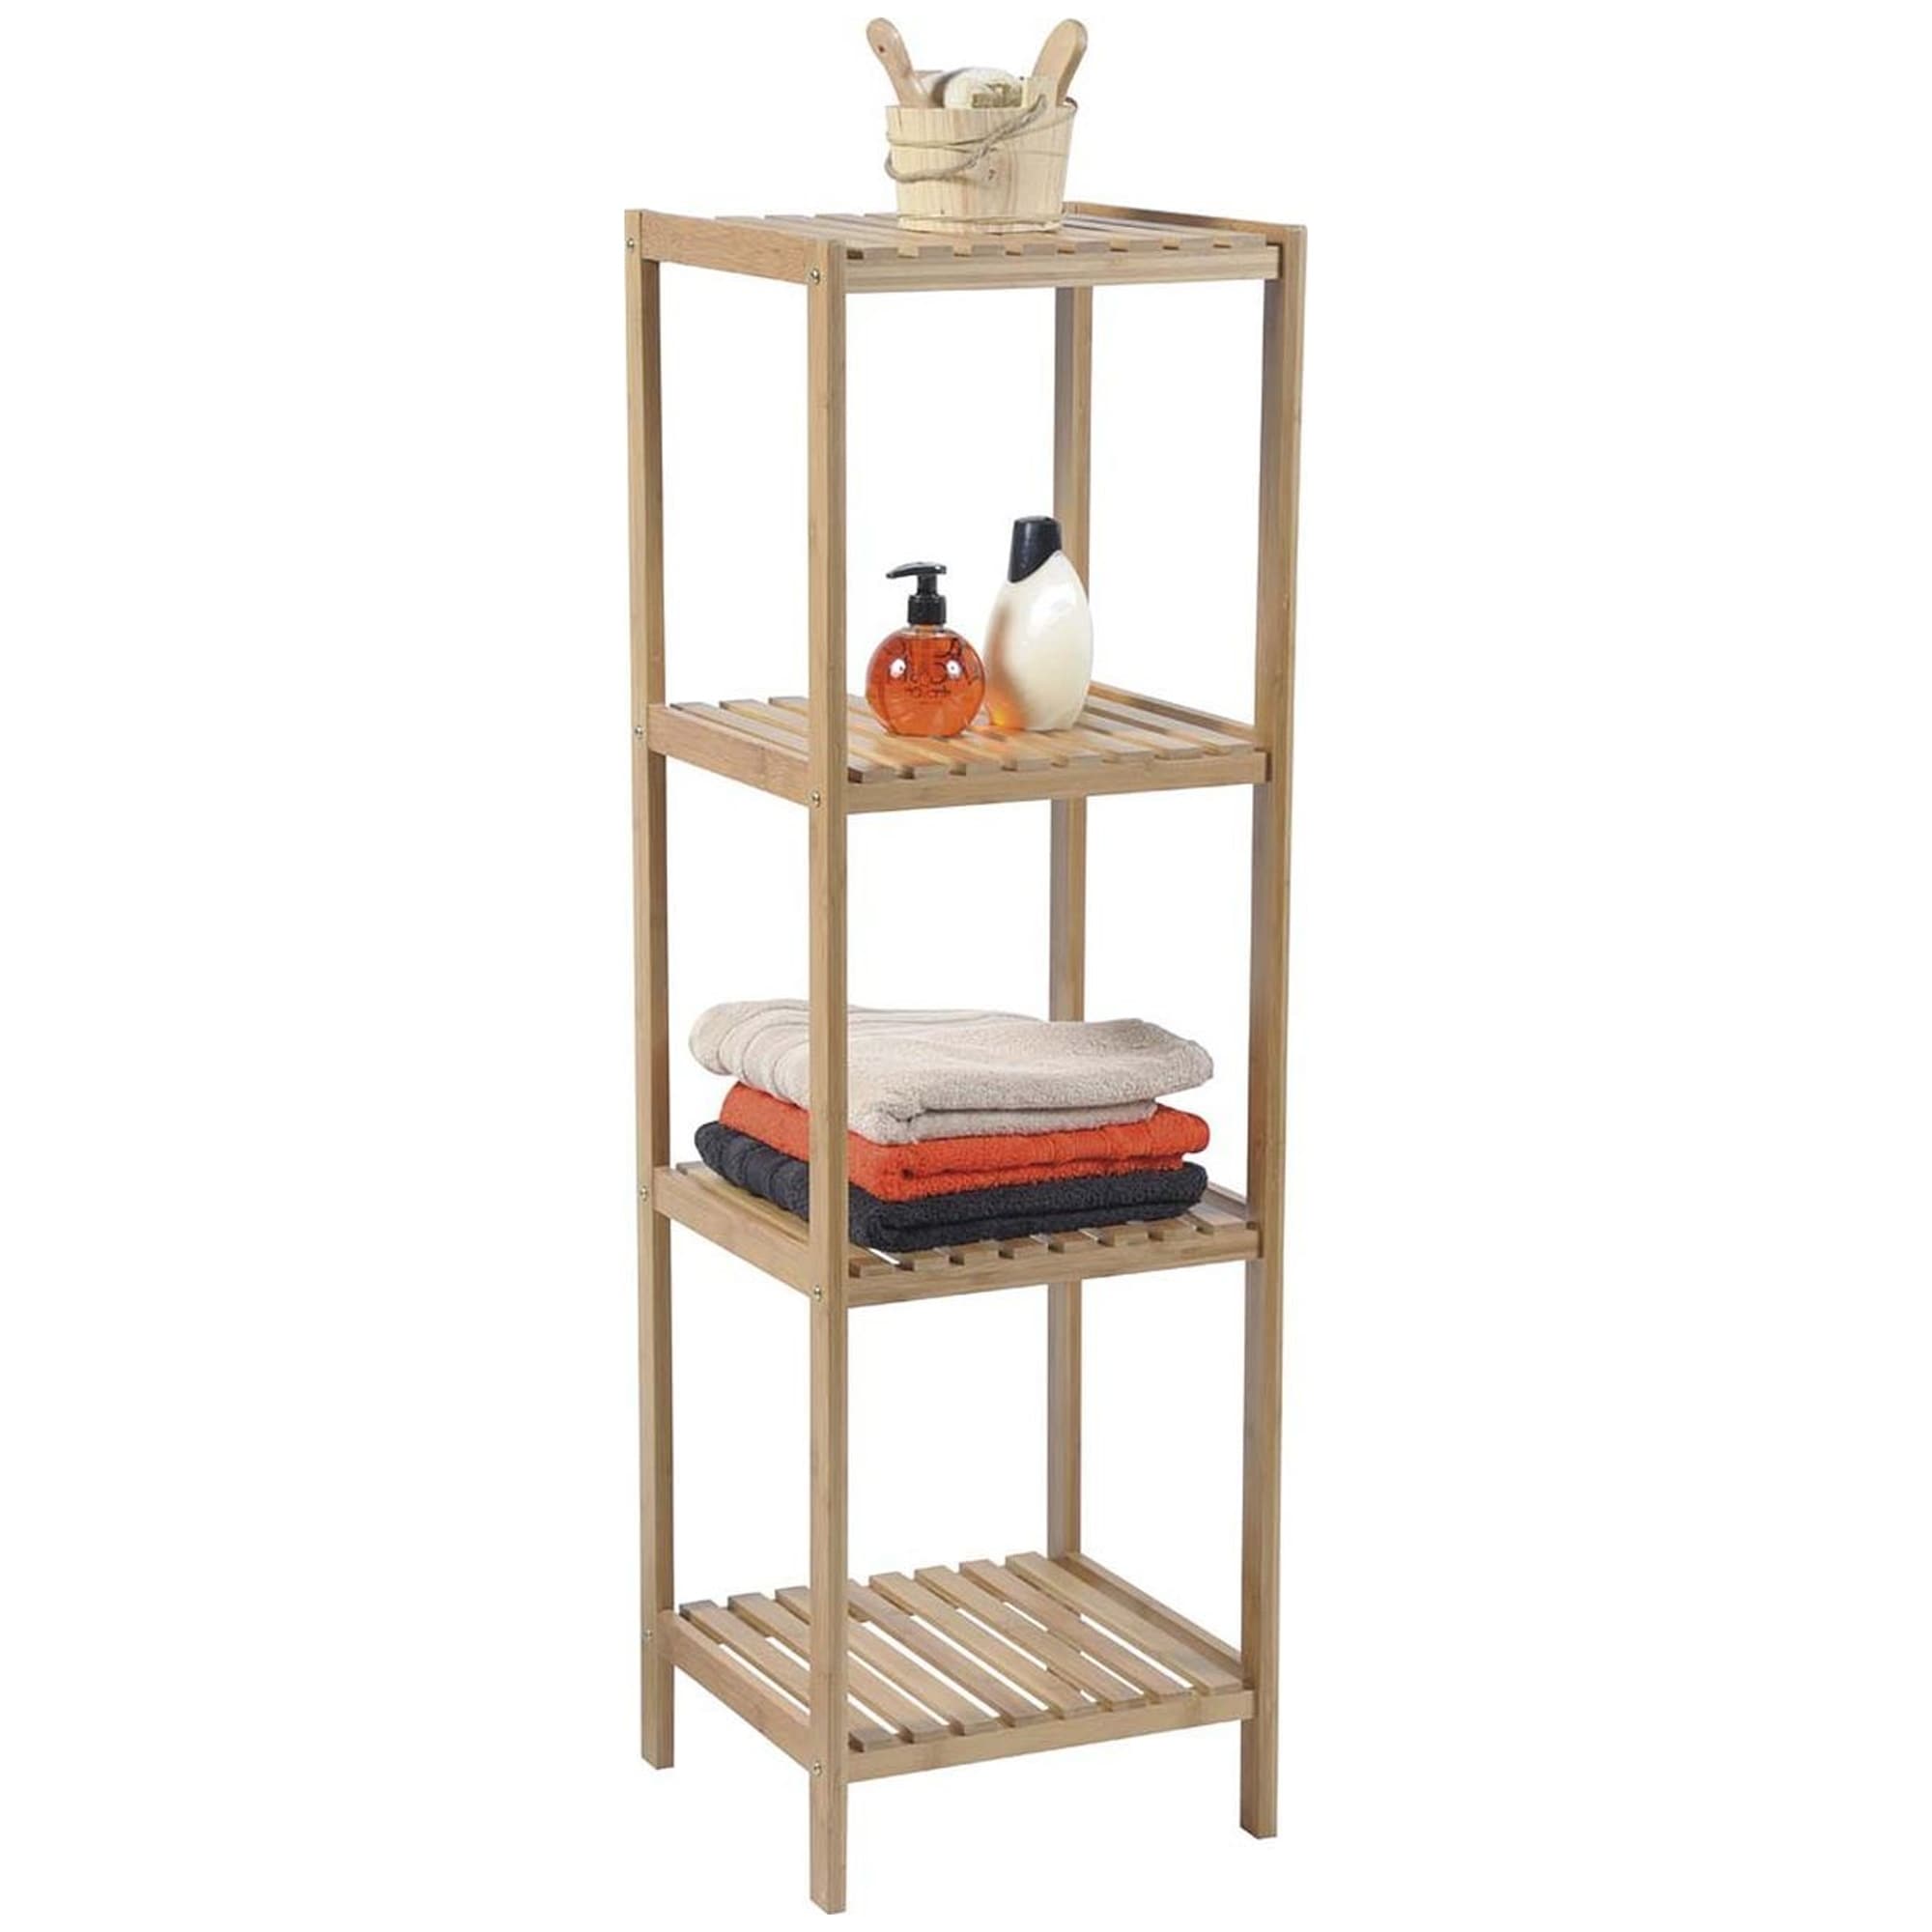 https://ak1.ostkcdn.com/images/products/is/images/direct/ac18d2e142302f394b316544c4480fe42a7b86fd/Bath-Multi-Use-Shelving-Unit-Tower-4-or-3-Shelves-Ecobio-Bamboo.jpg